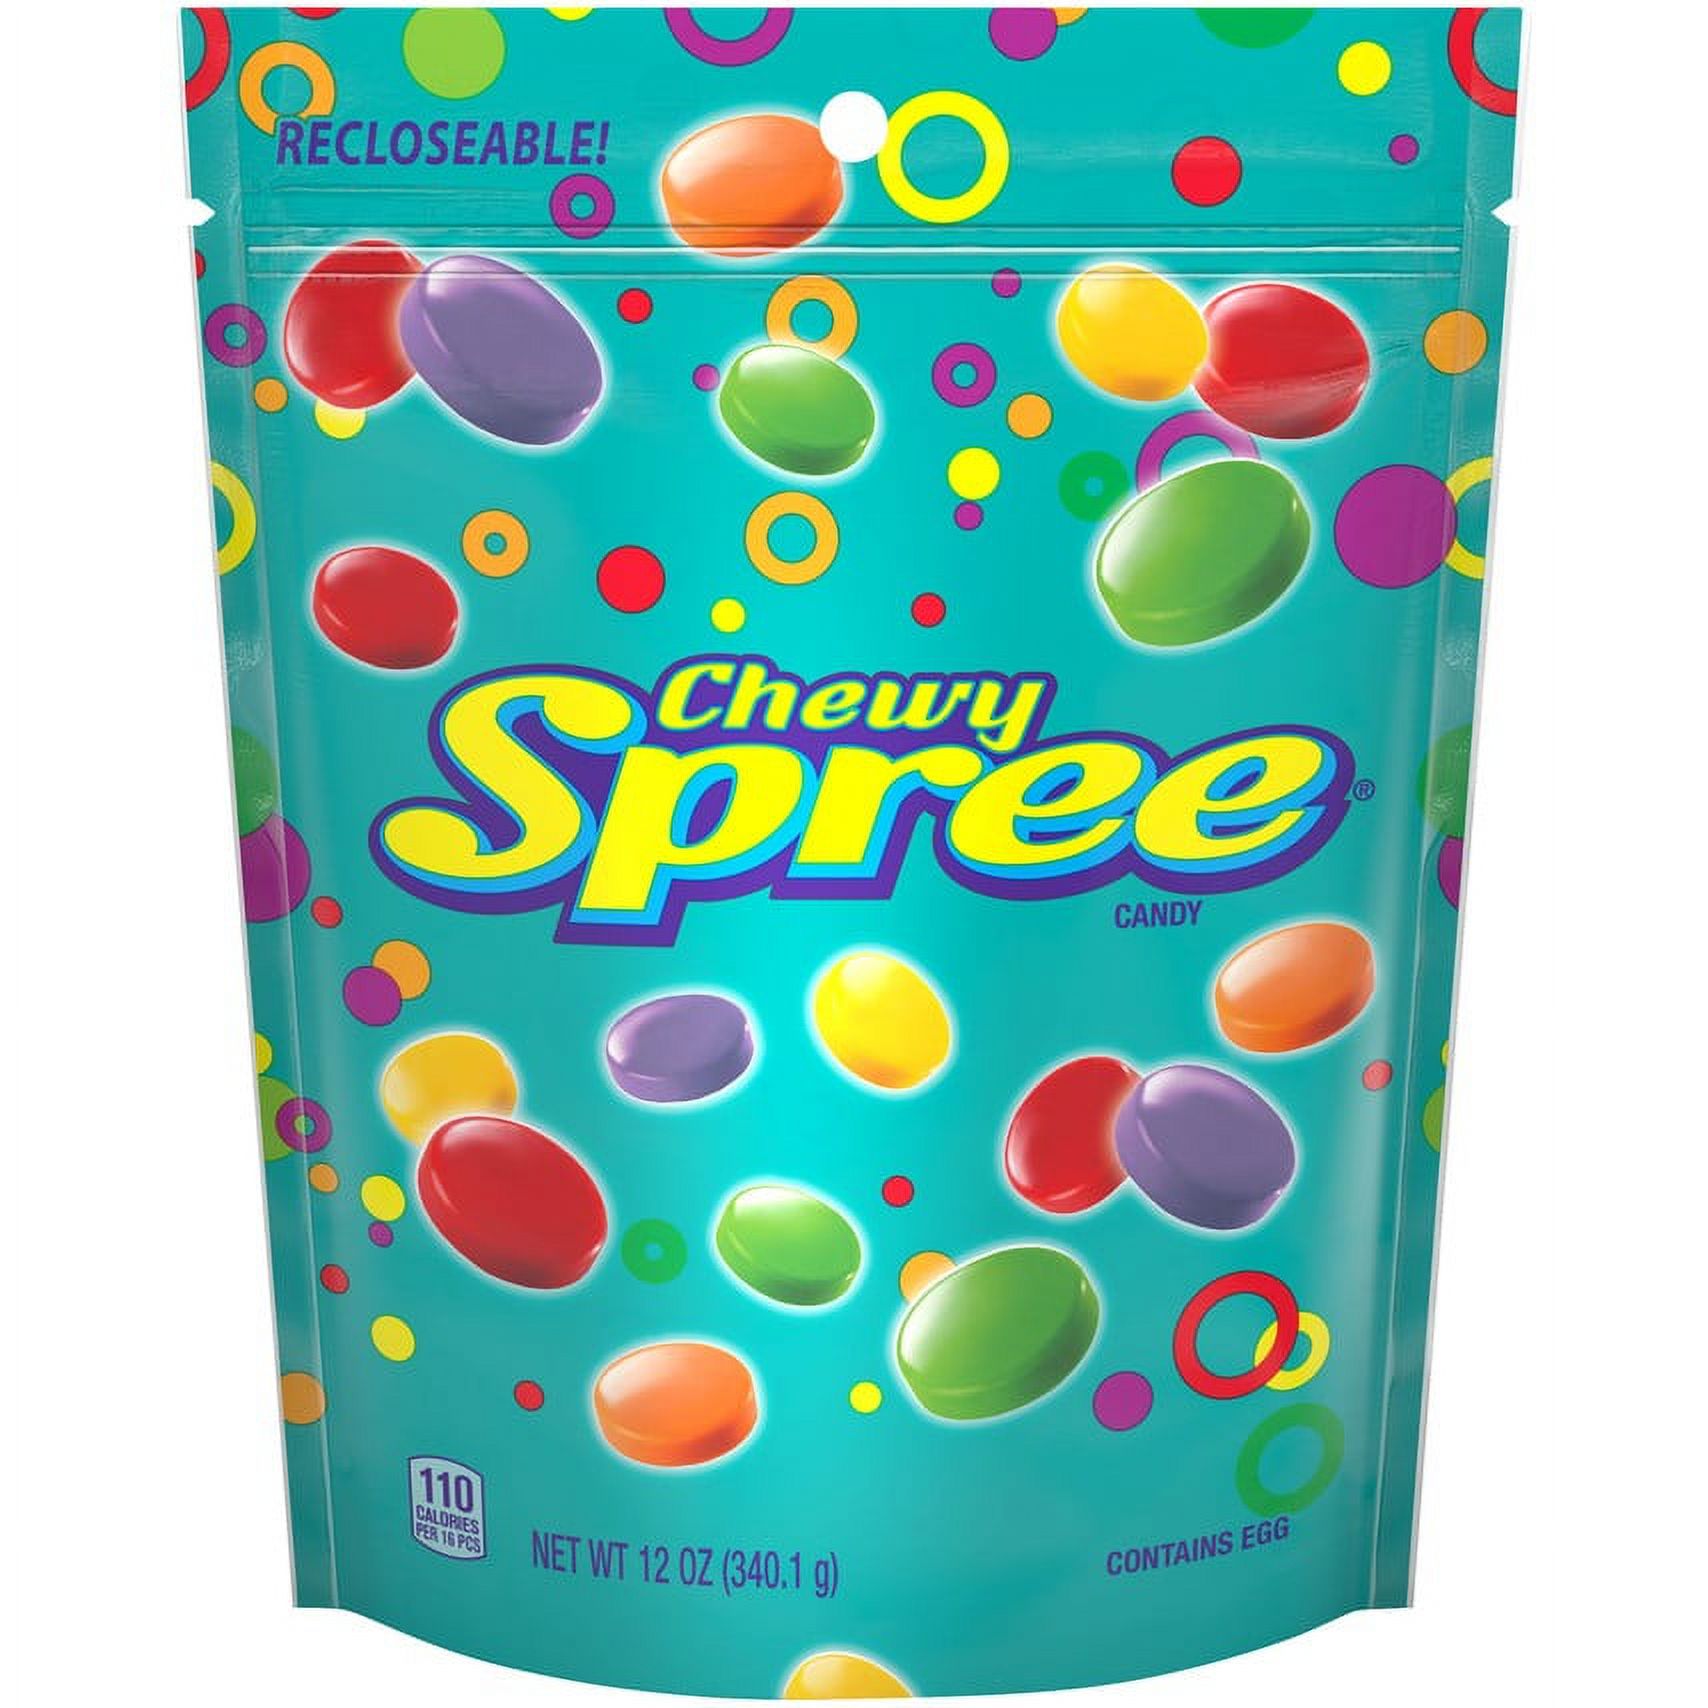 Spree Chewy Candy Bag, 12 oz - image 1 of 7